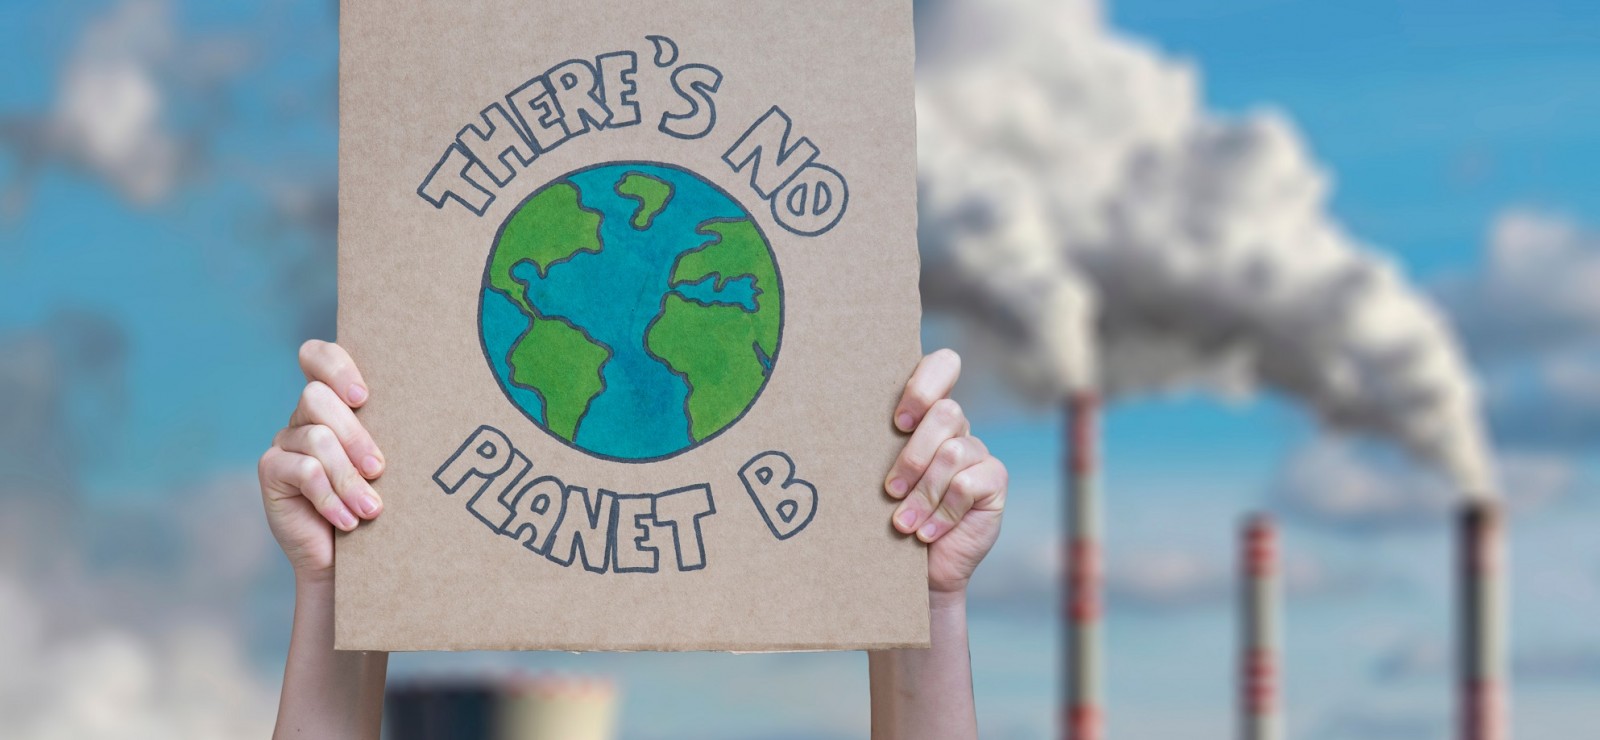 Klimaatbetoger met bord "There's no planet B"